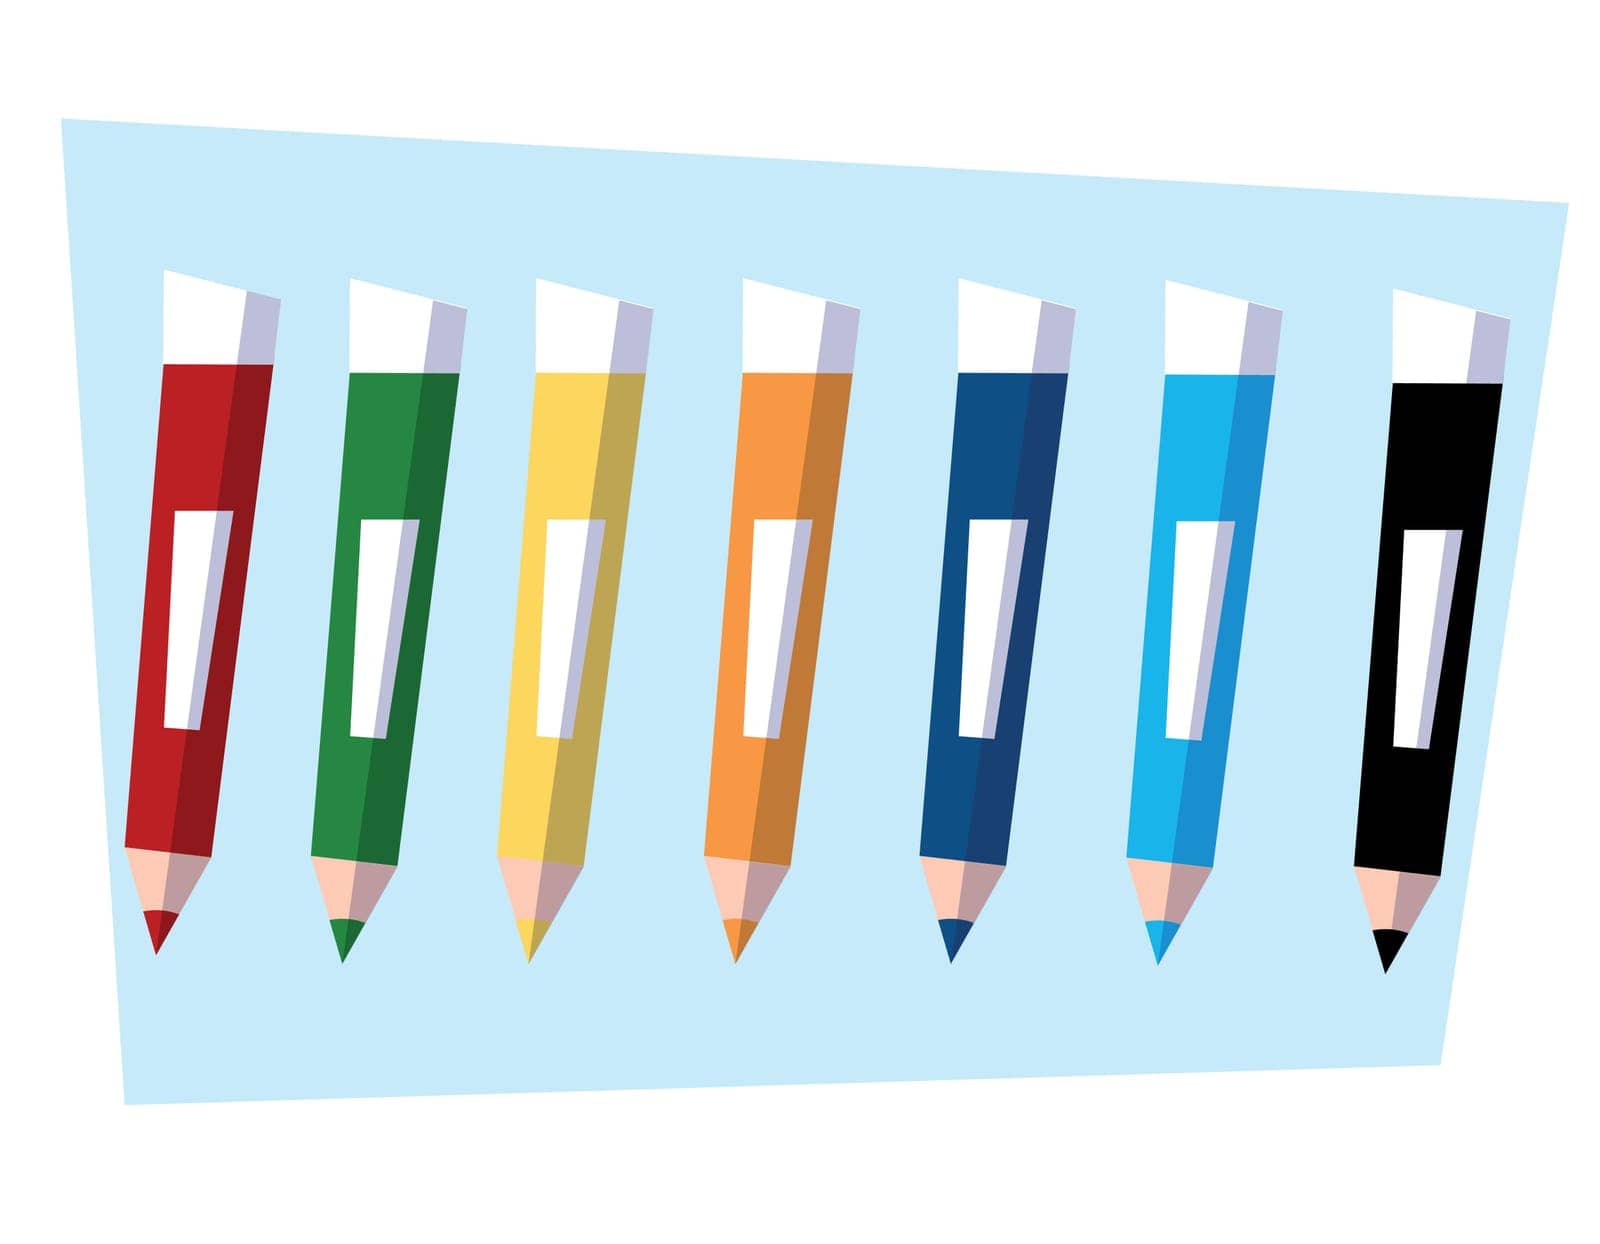 colored pencils, vector graphics flat style, simple drawing, red yellow, blue, yellow, orange, cyan pencil. School office